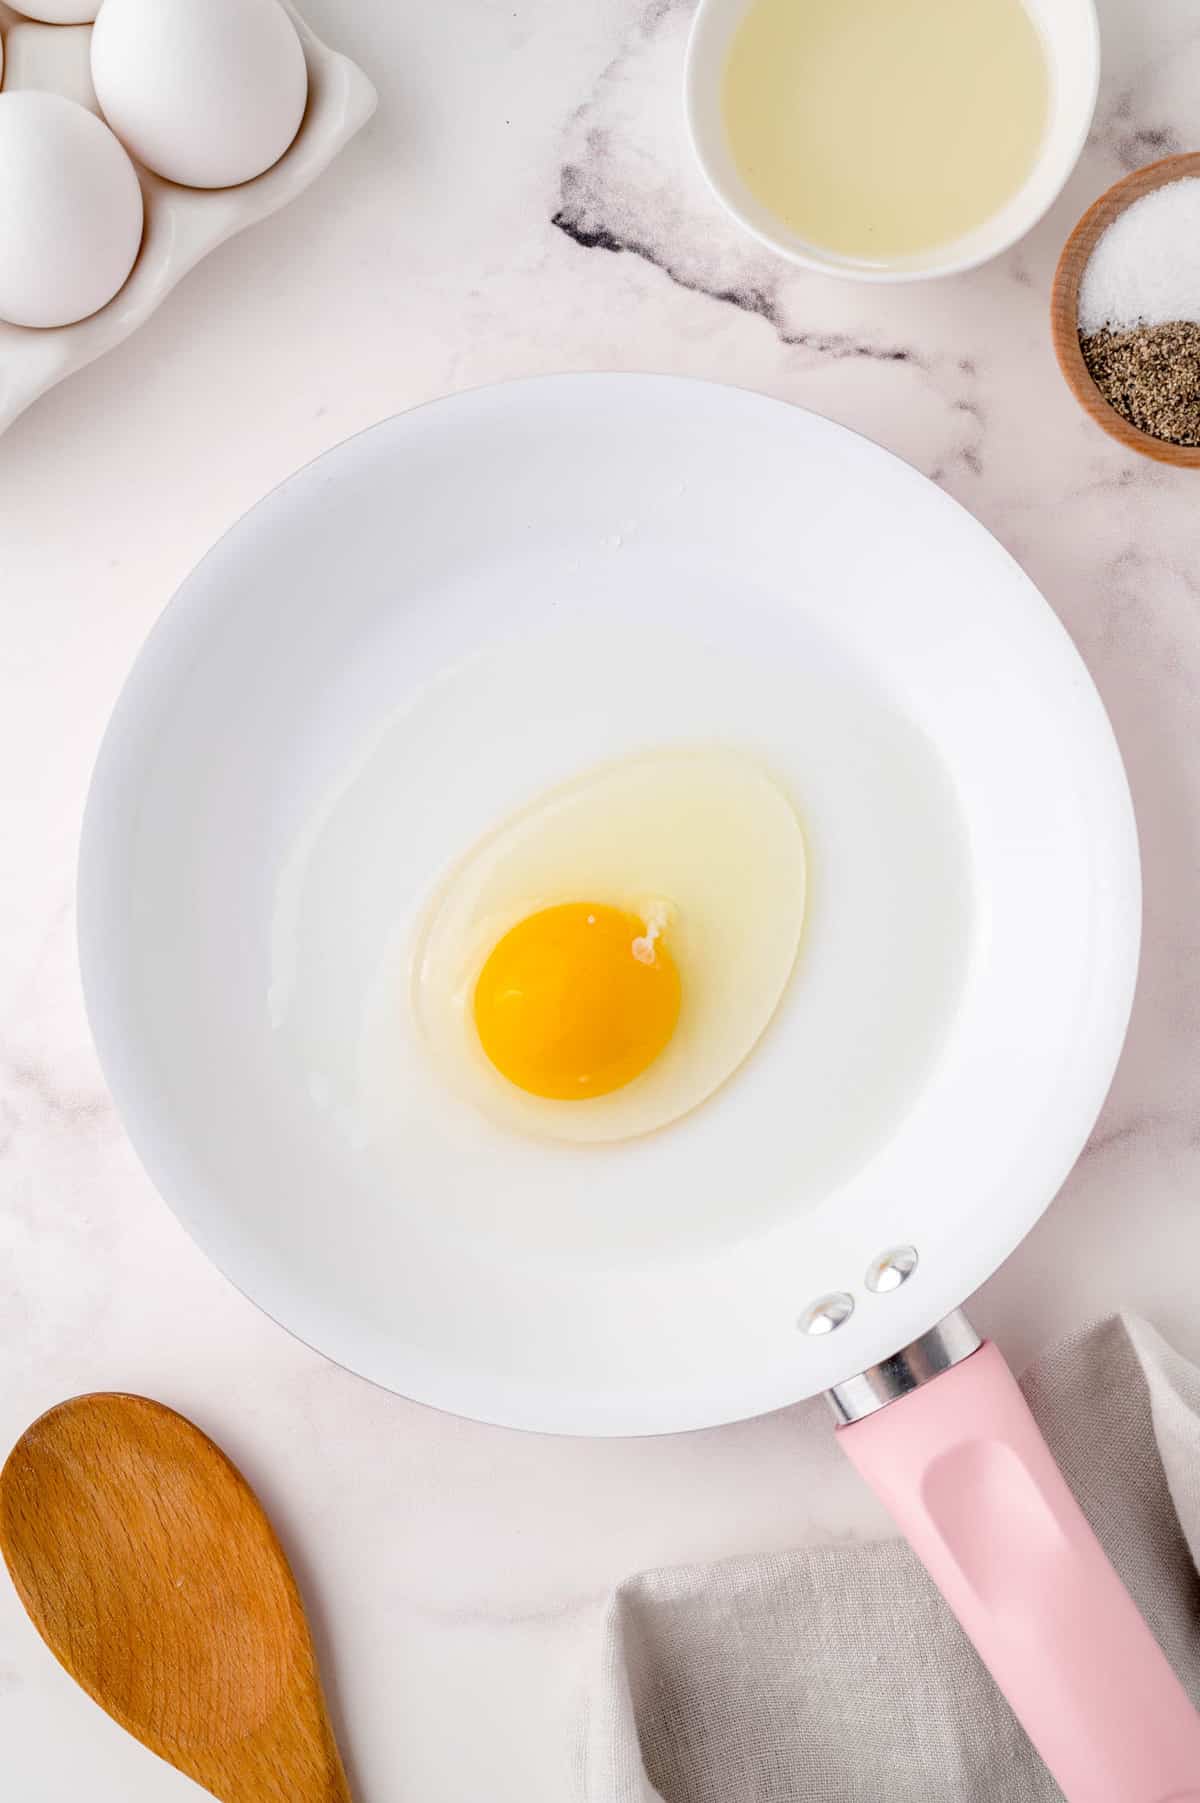 Uncooked egg in a frying pan.